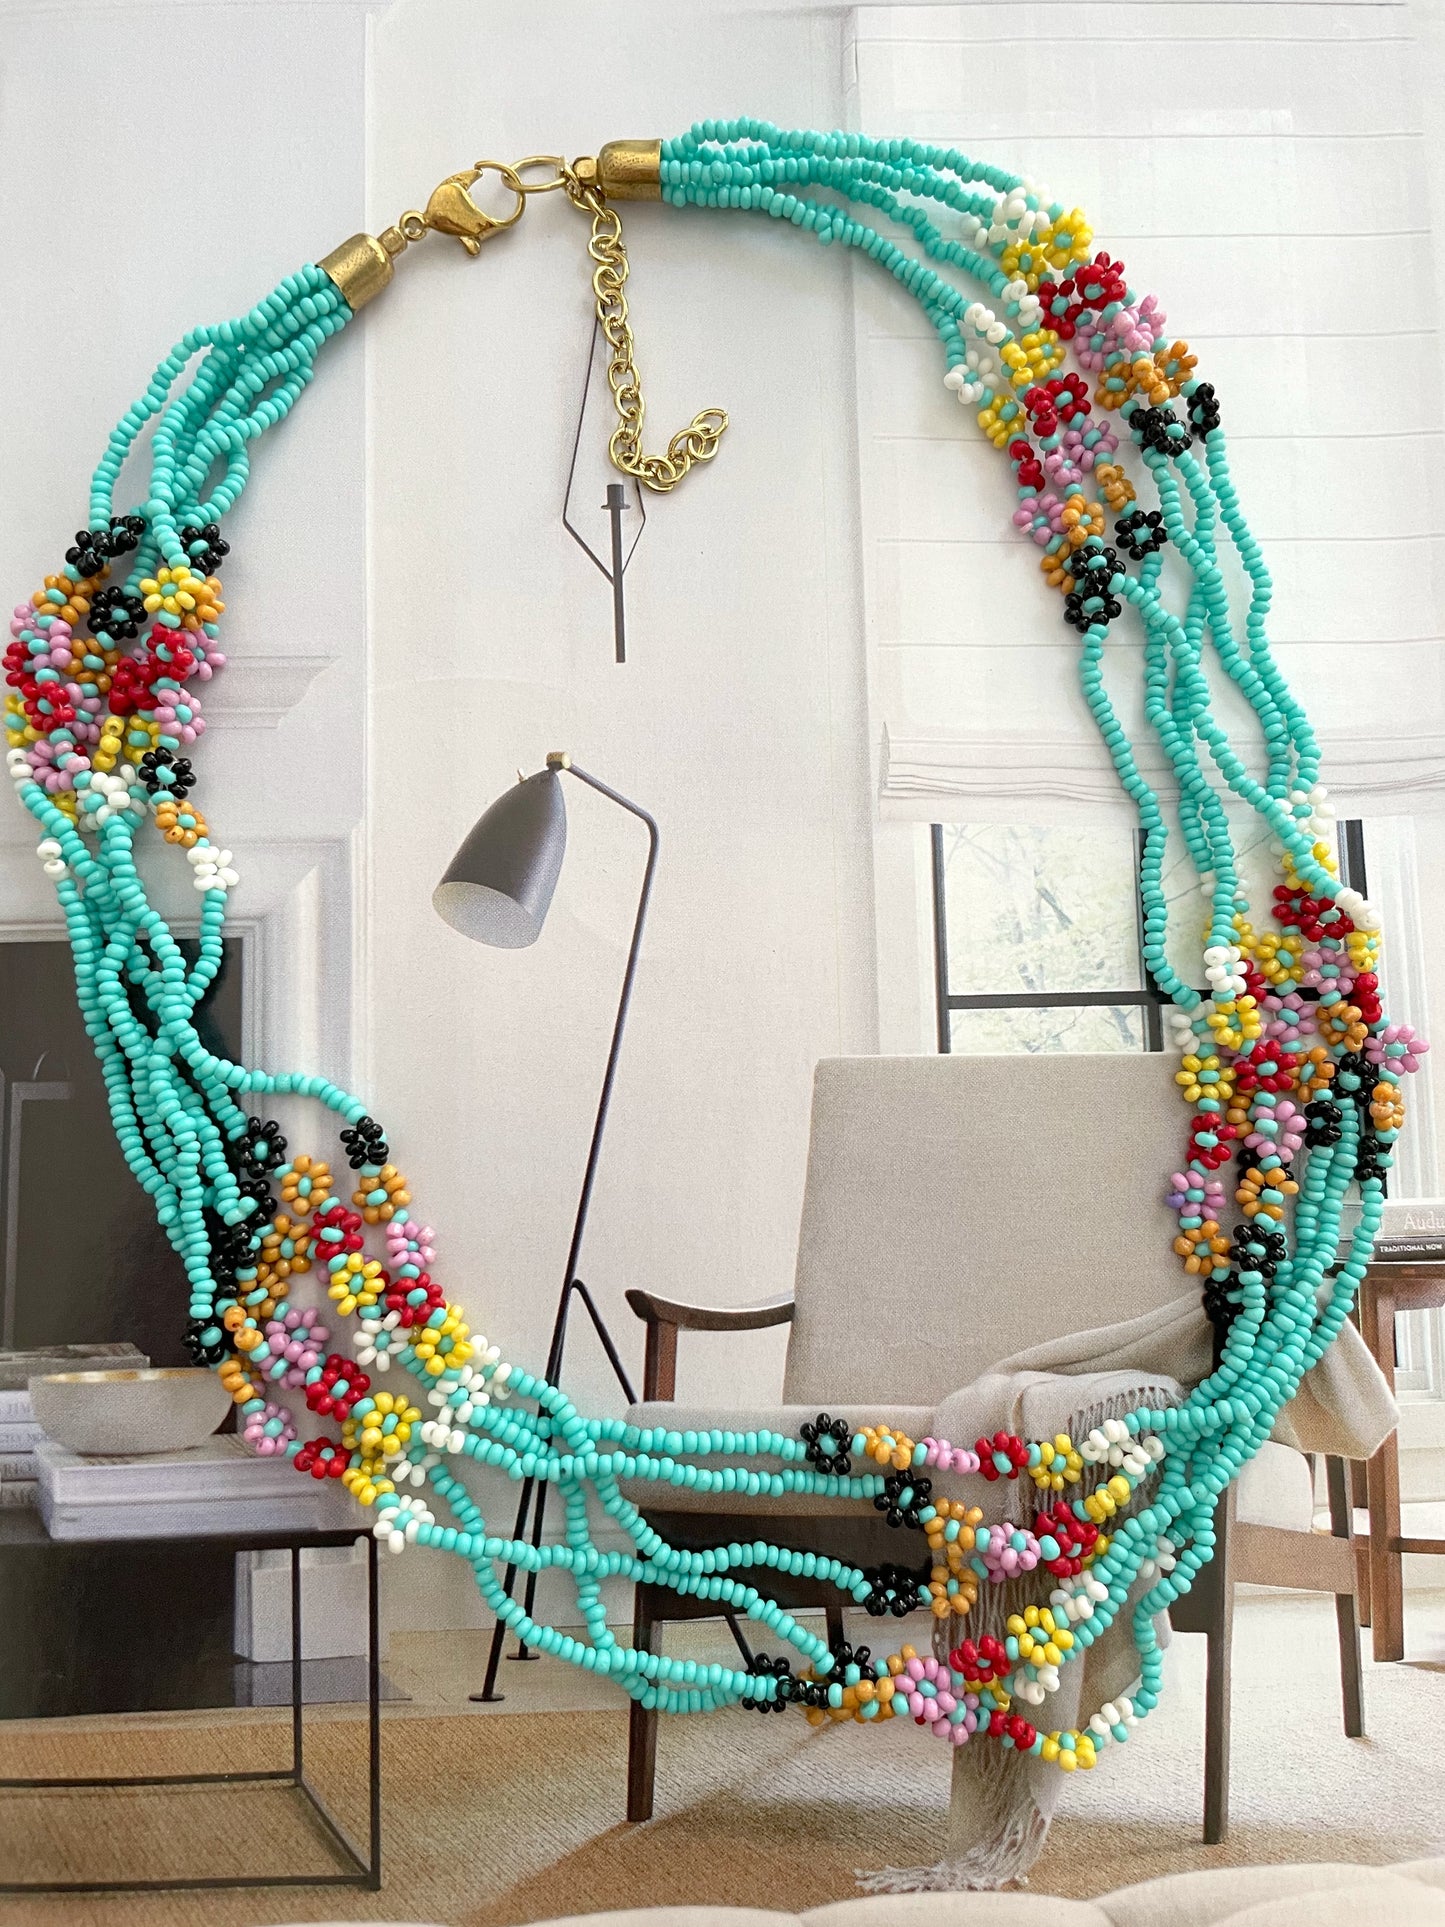 Flower beaded multi layered necklace